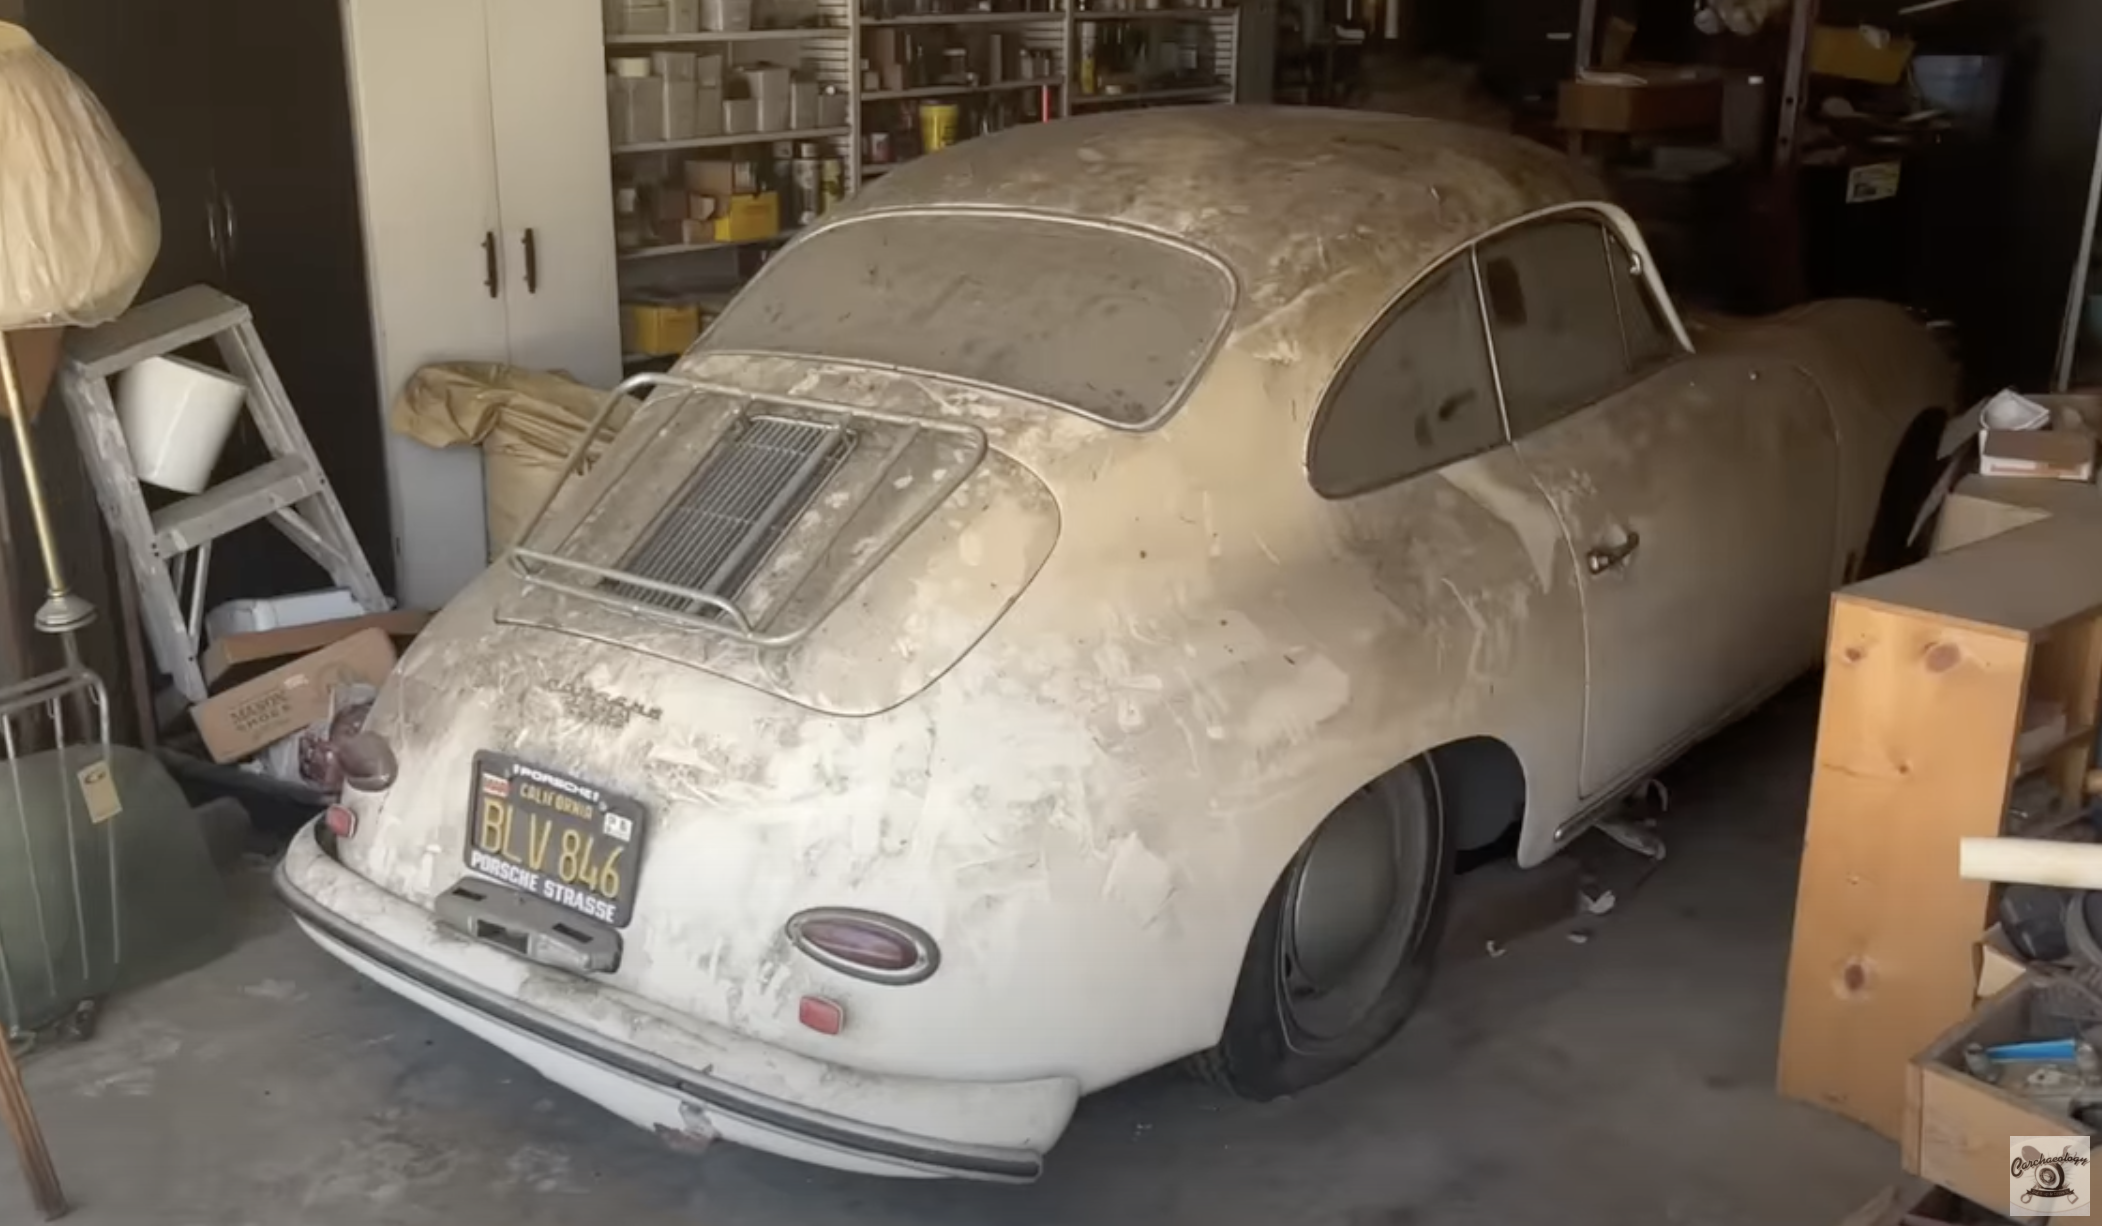 Video: 1959 Porsche 356 Super “Barn Find” Sees Daylight After 38 Years